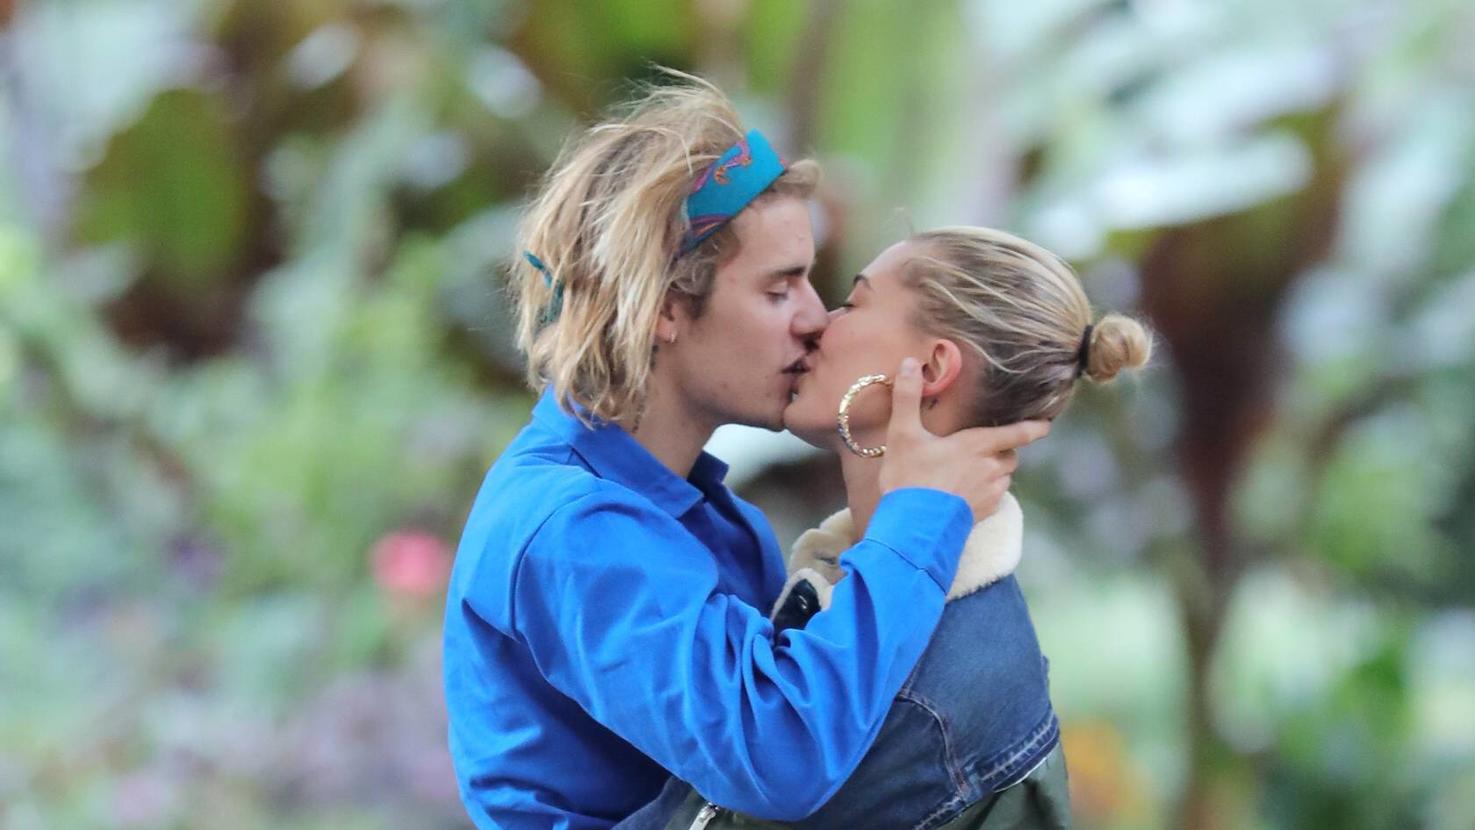  Canadian singer Justin Bieber and American model Hailey Baldwin spotted in St James Park, London. SEPTEMBER 17th 2018 PUBLICATIONxINxGERxSUIxAUTxHUNxONLY MNIx183196